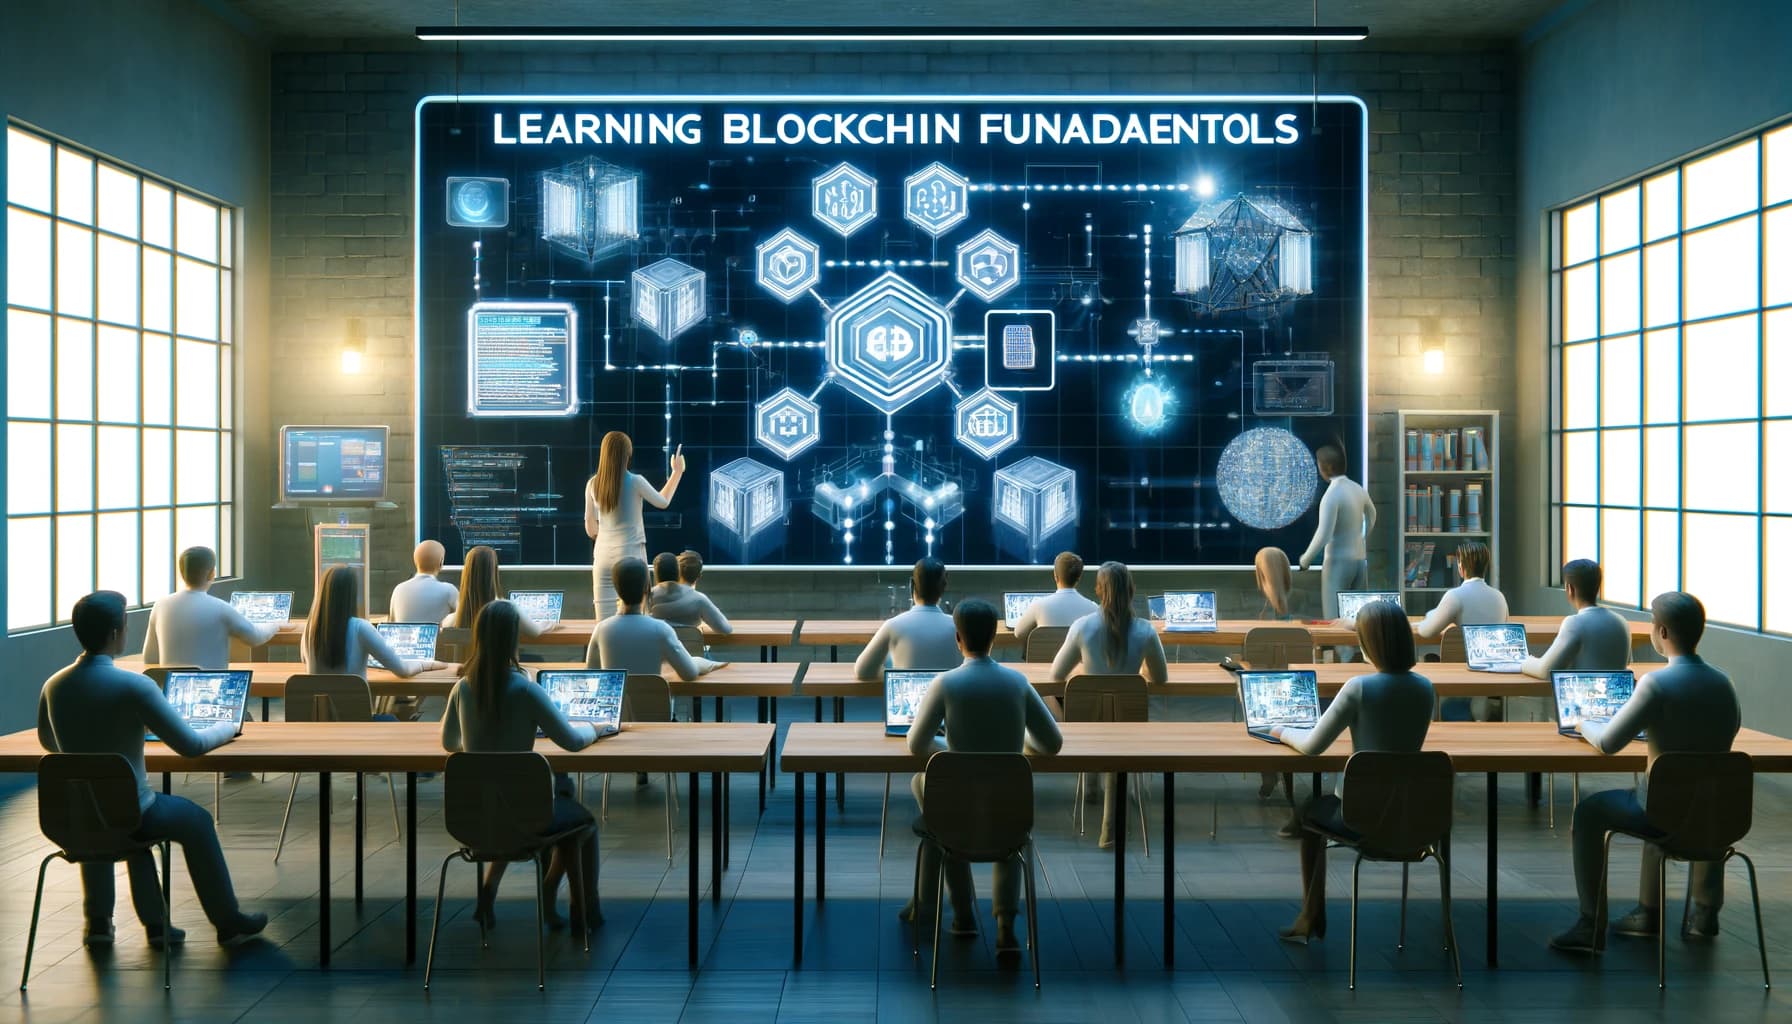 Bucket Technologies image showing a large digital blackboard in a classroom that's displaying a blockchain drawing.